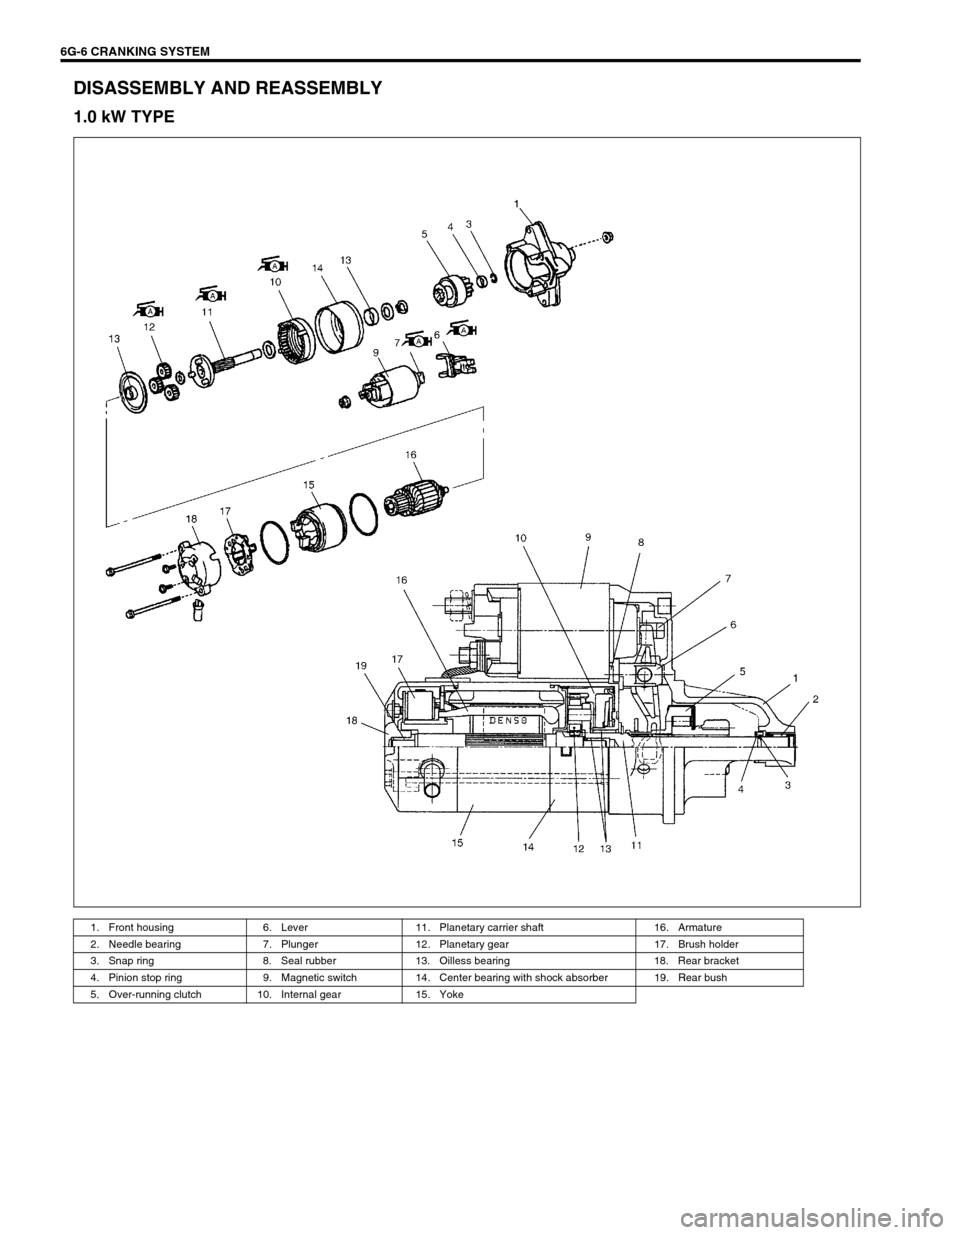 SUZUKI SWIFT 2000 1.G RG413 Service Repair Manual 6G-6 CRANKING SYSTEM
DISASSEMBLY AND REASSEMBLY
1.0 kW TYPE
1. Front housing 6. Lever 11. Planetary carrier shaft 16. Armature
2. Needle bearing 7. Plunger 12. Planetary gear 17. Brush holder
3. Snap 